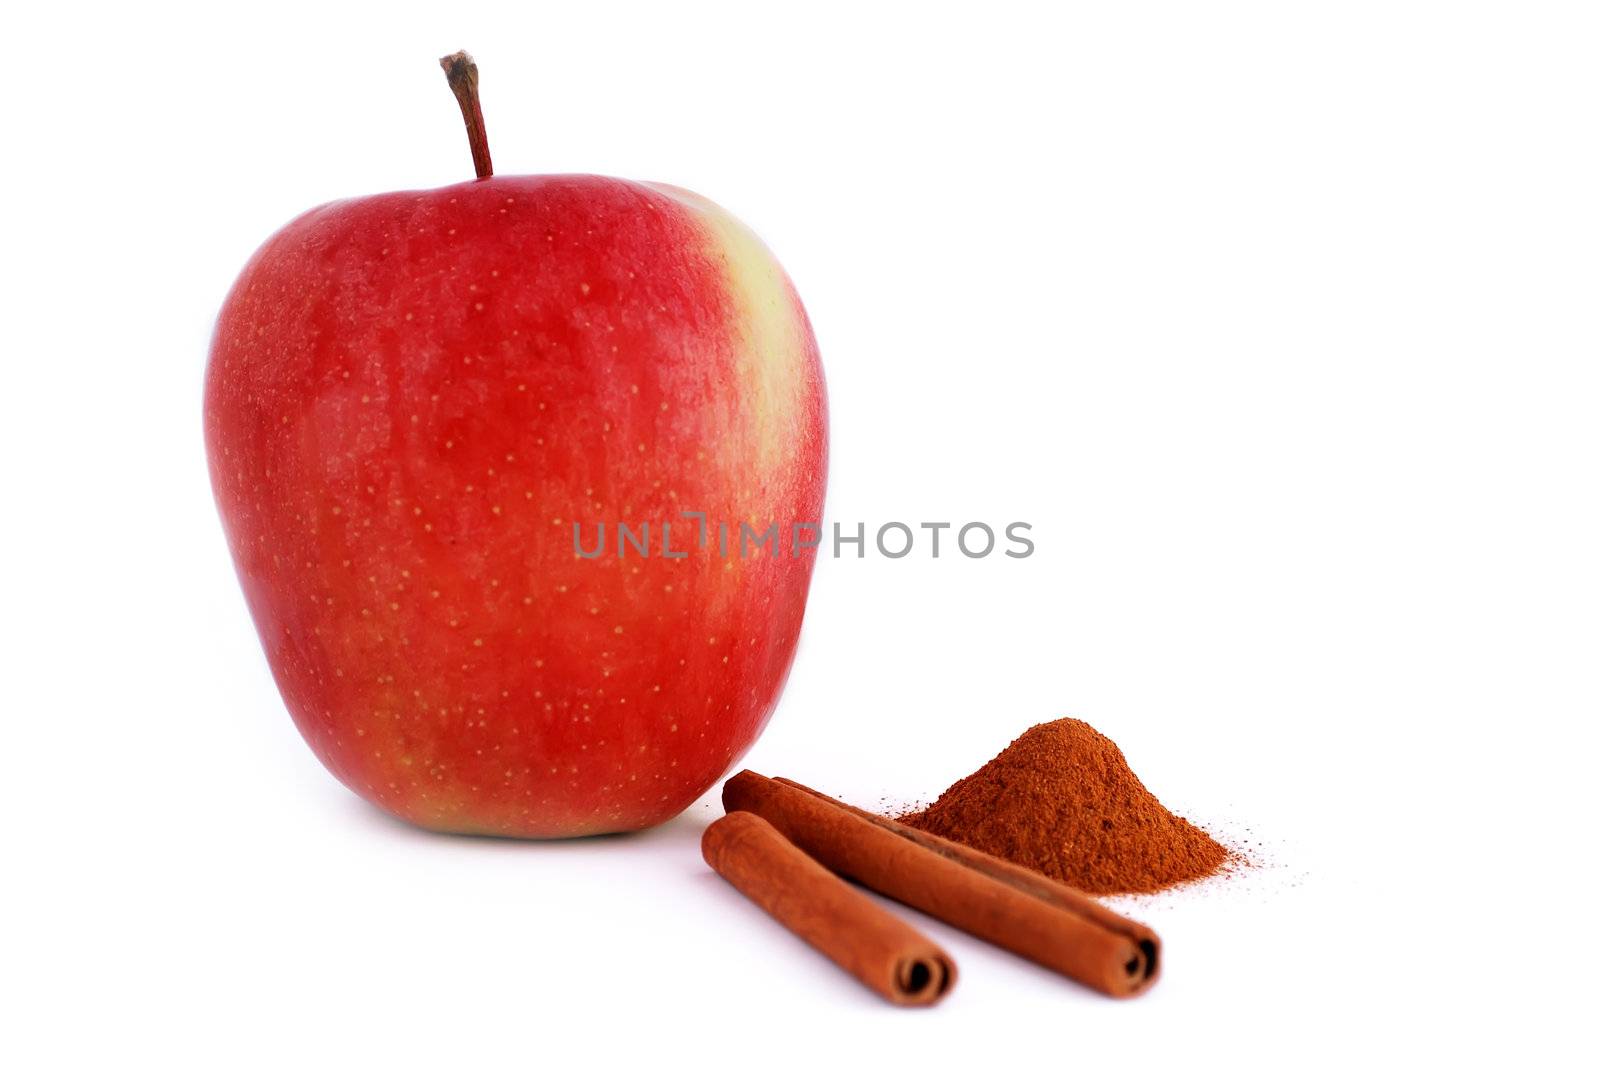 red apple with cinnamon on a white background